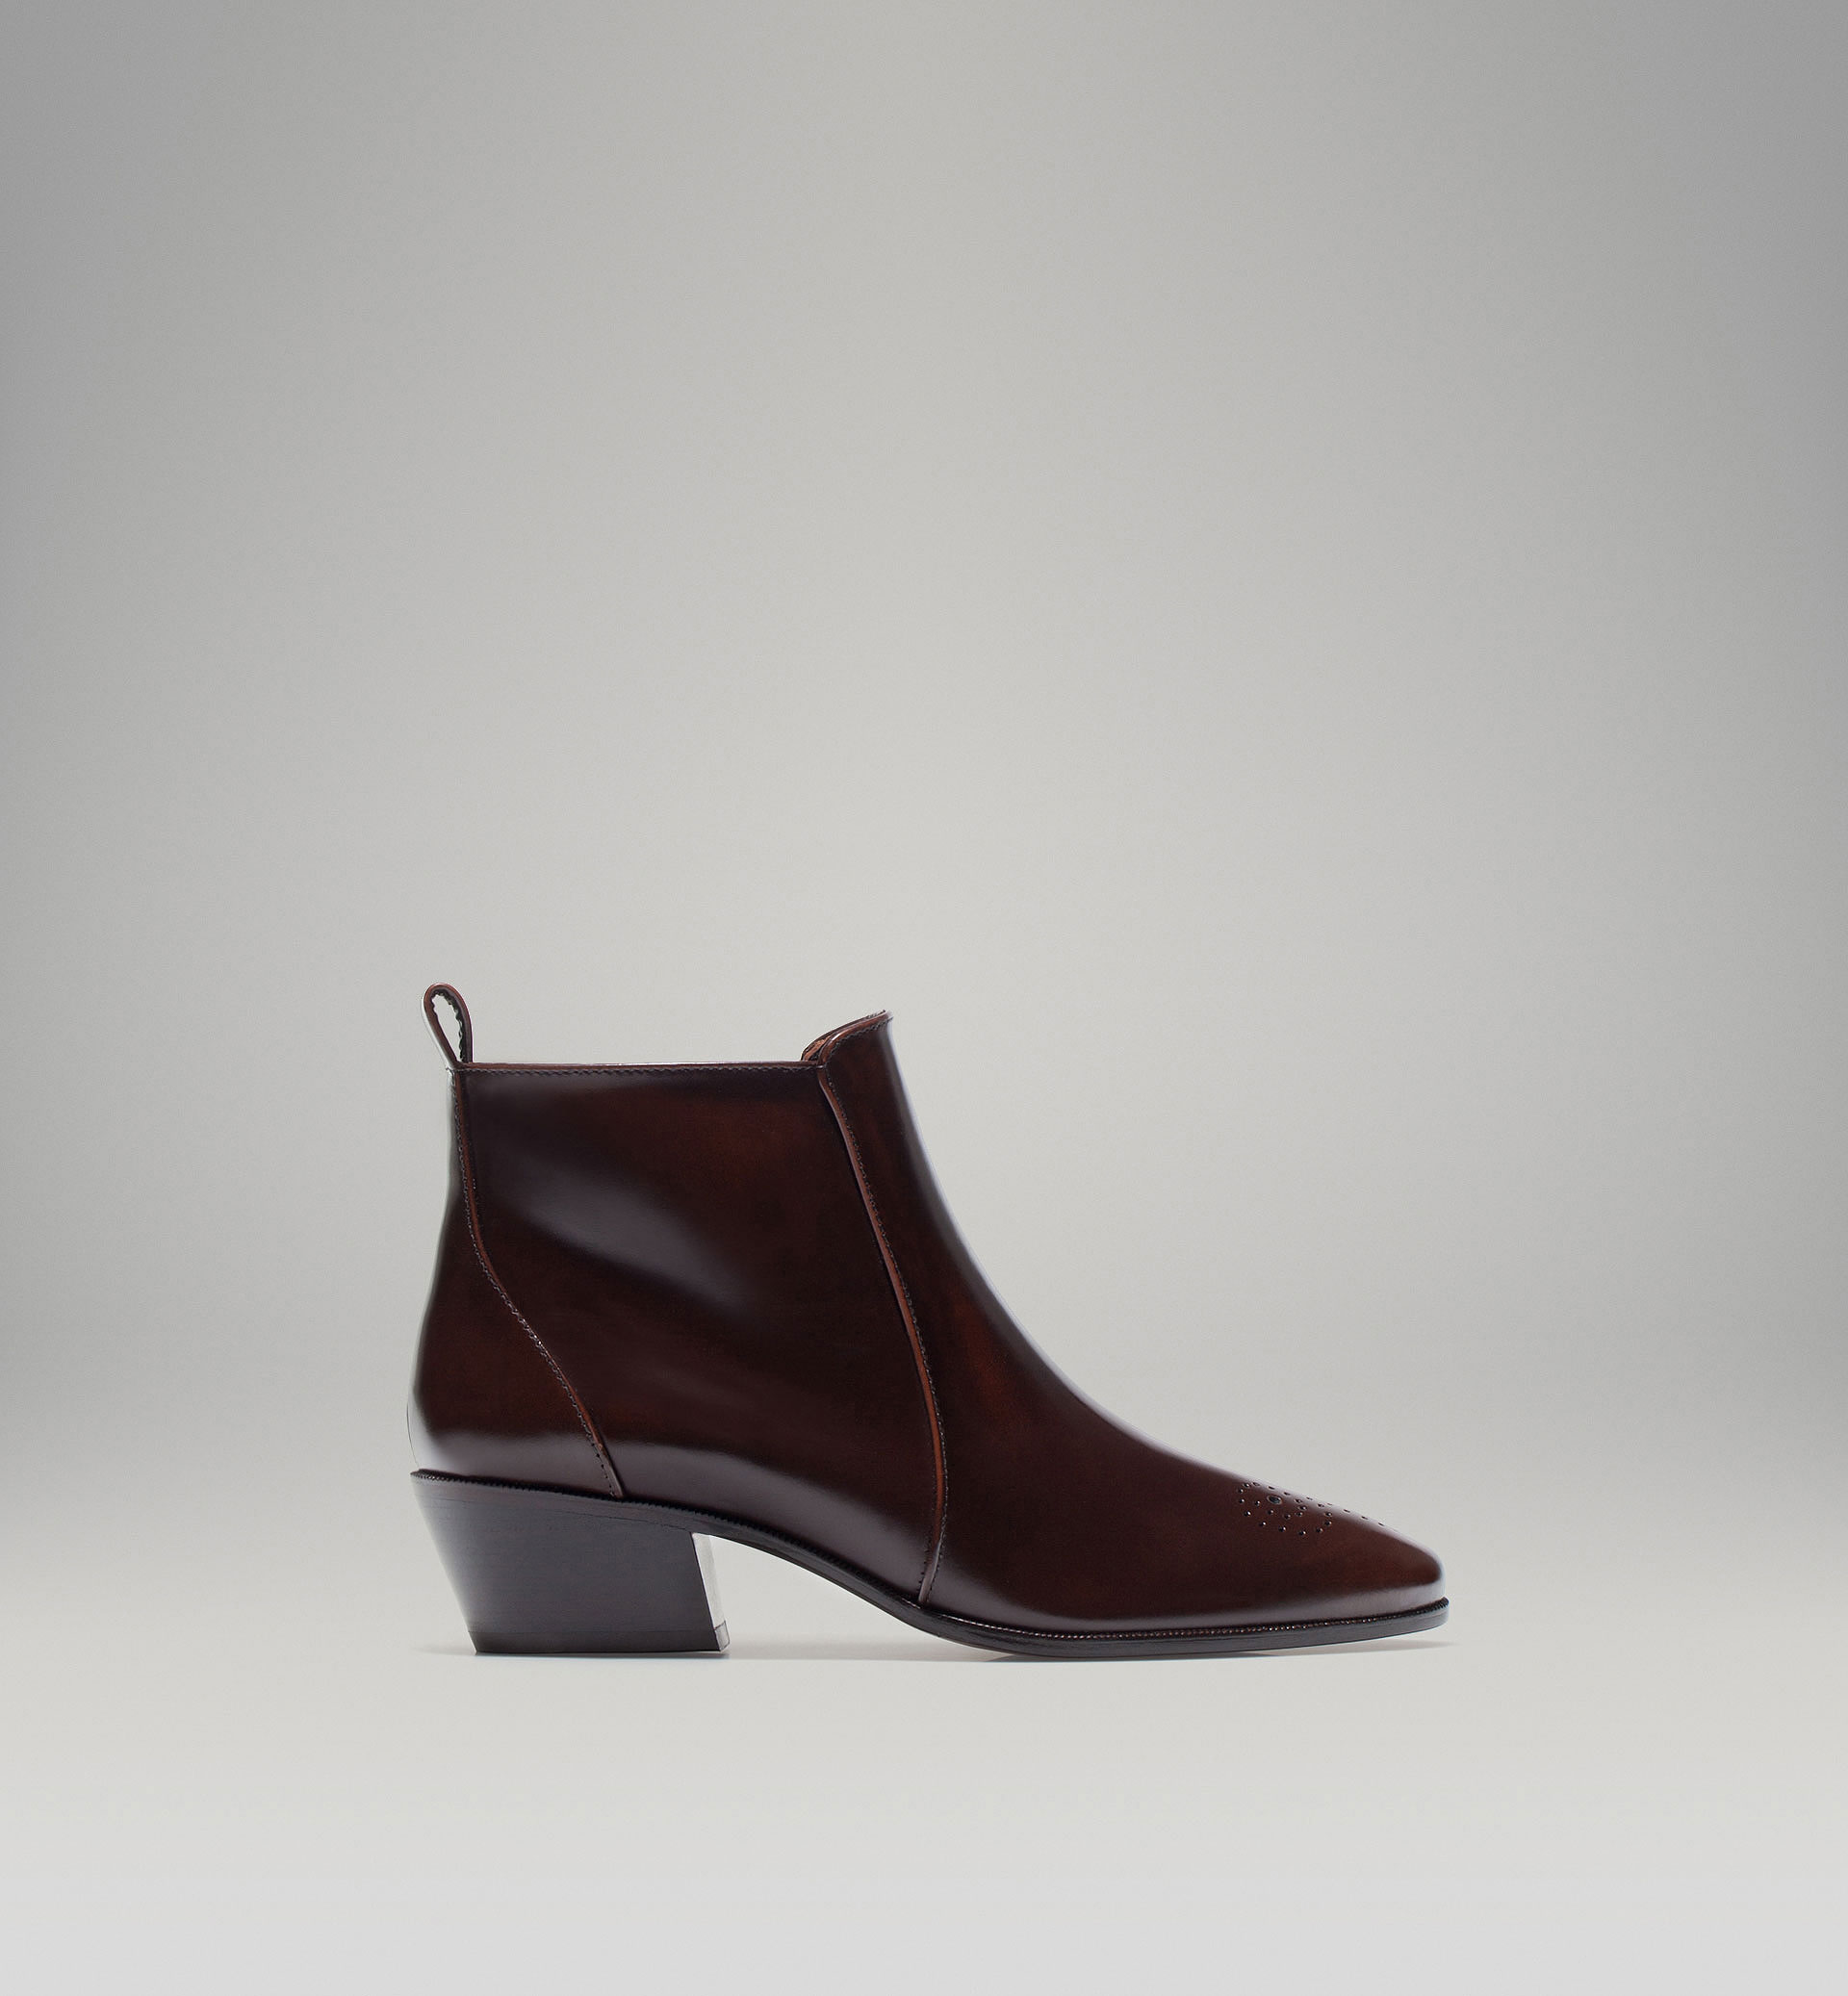 BROGUED ANTIK HIGH HEELED ANKLE BOOT